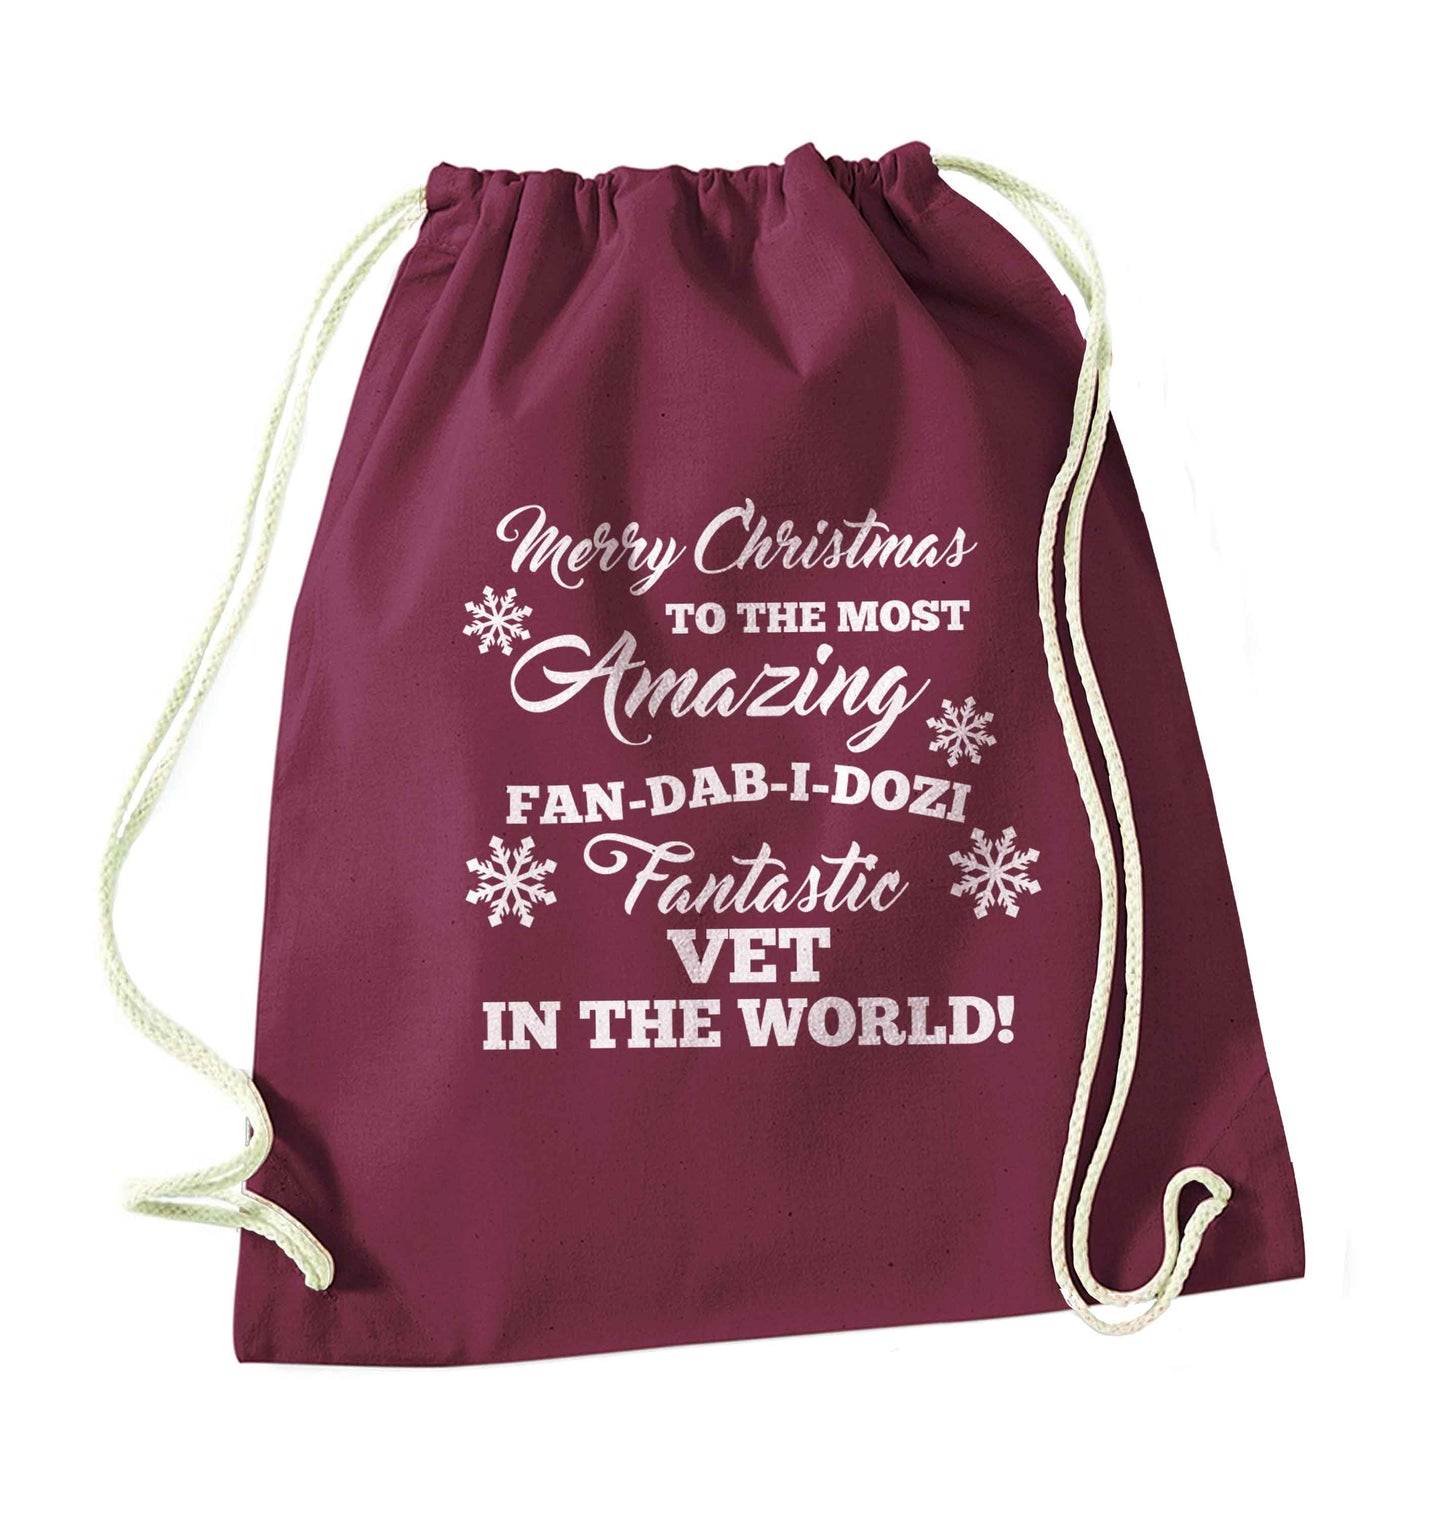 Merry Christmas to the most amazing vet in the world! maroon drawstring bag